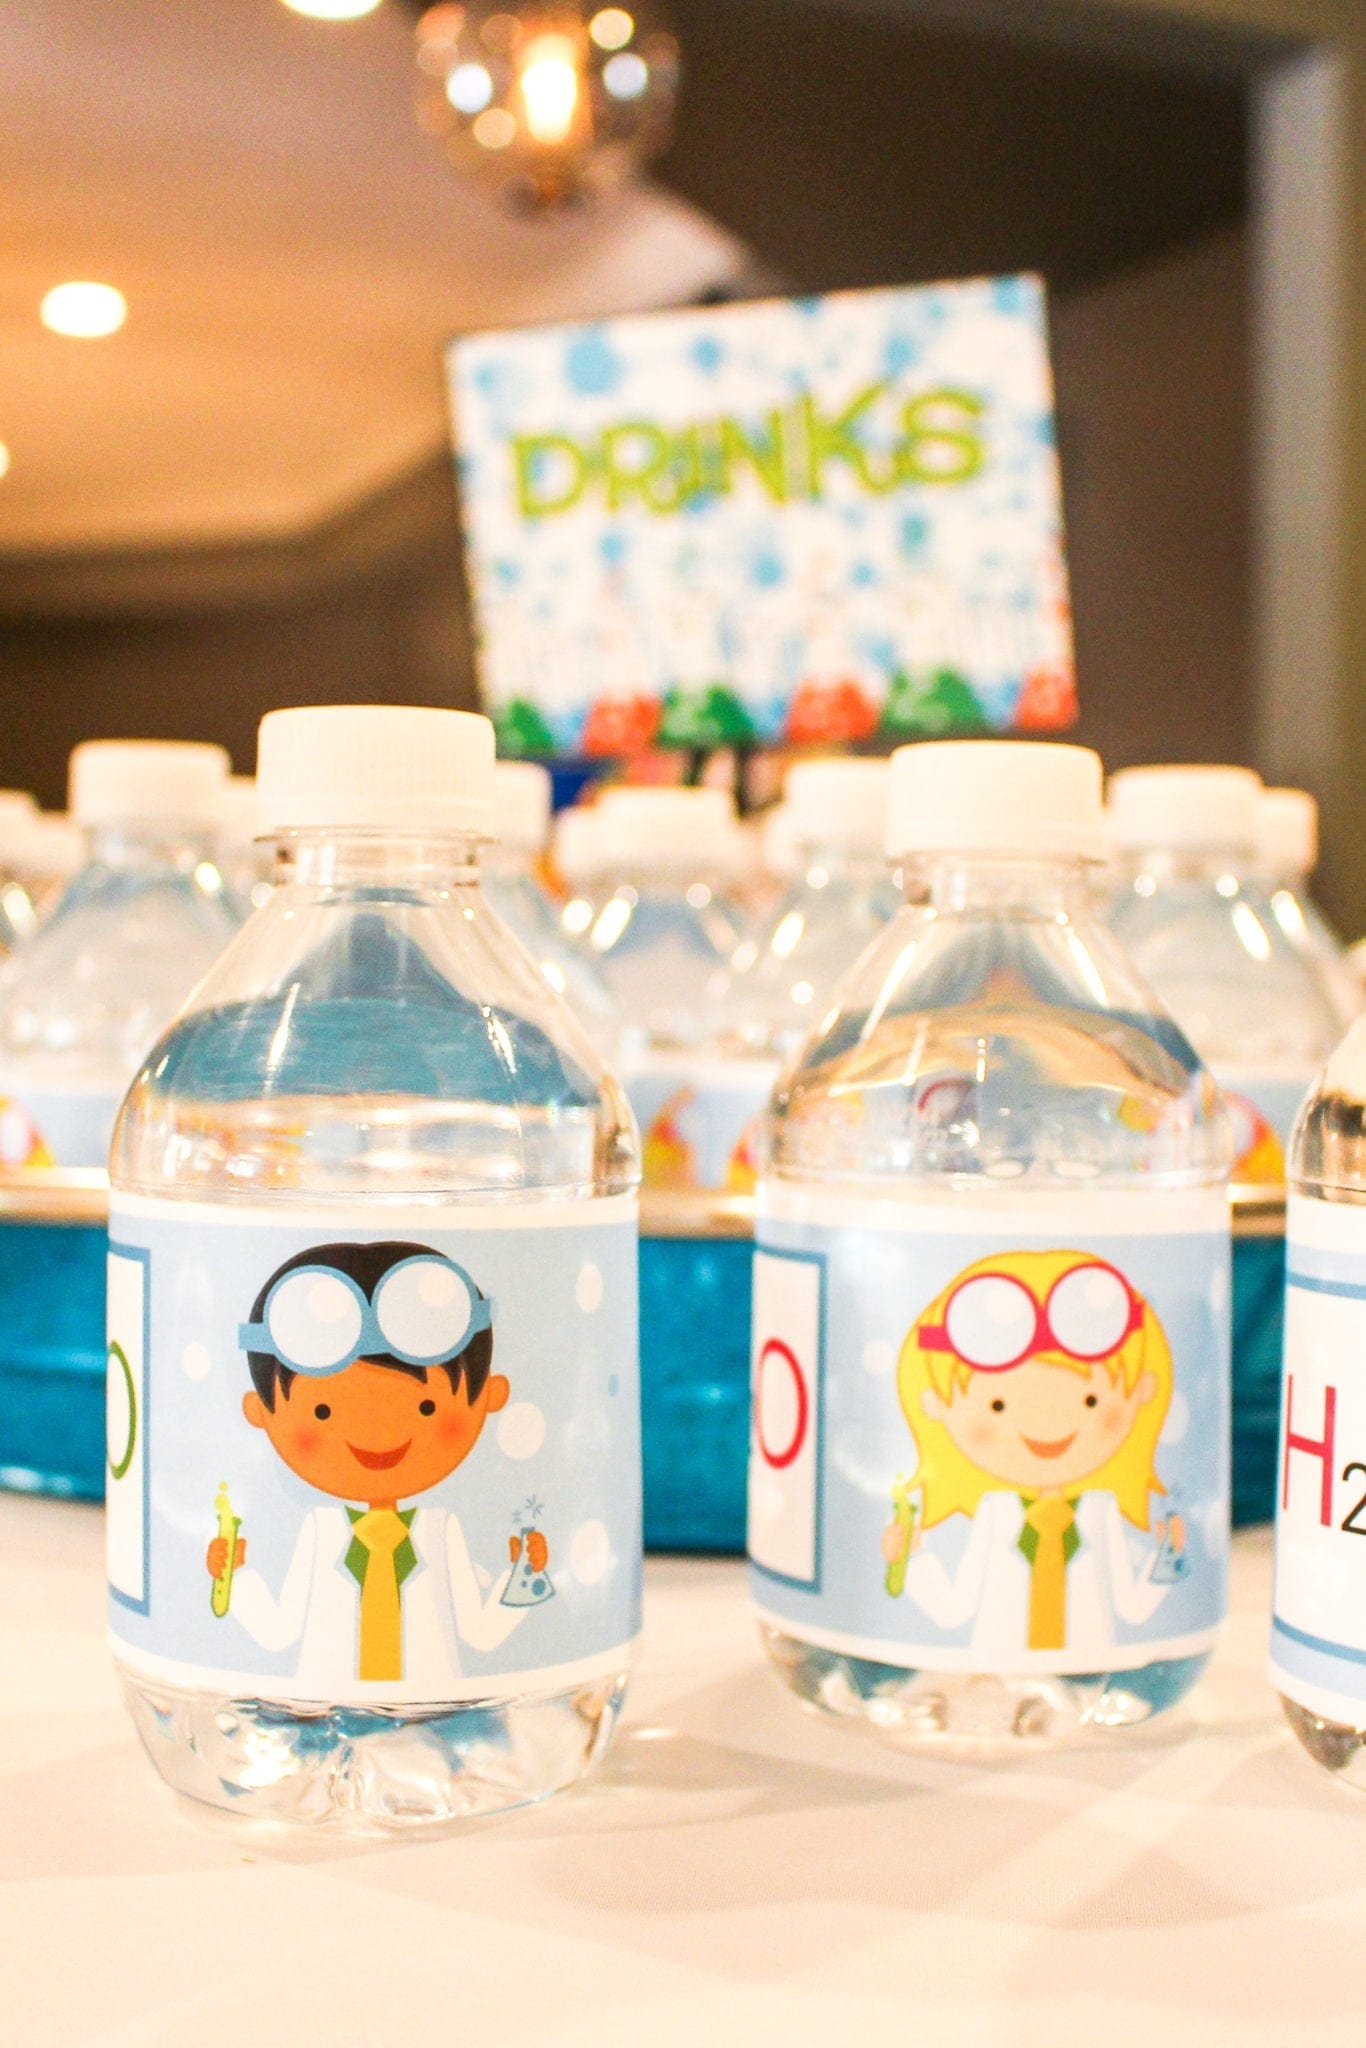 Science printable for water bottles. Quick and fun ways to throw a science party for your family!